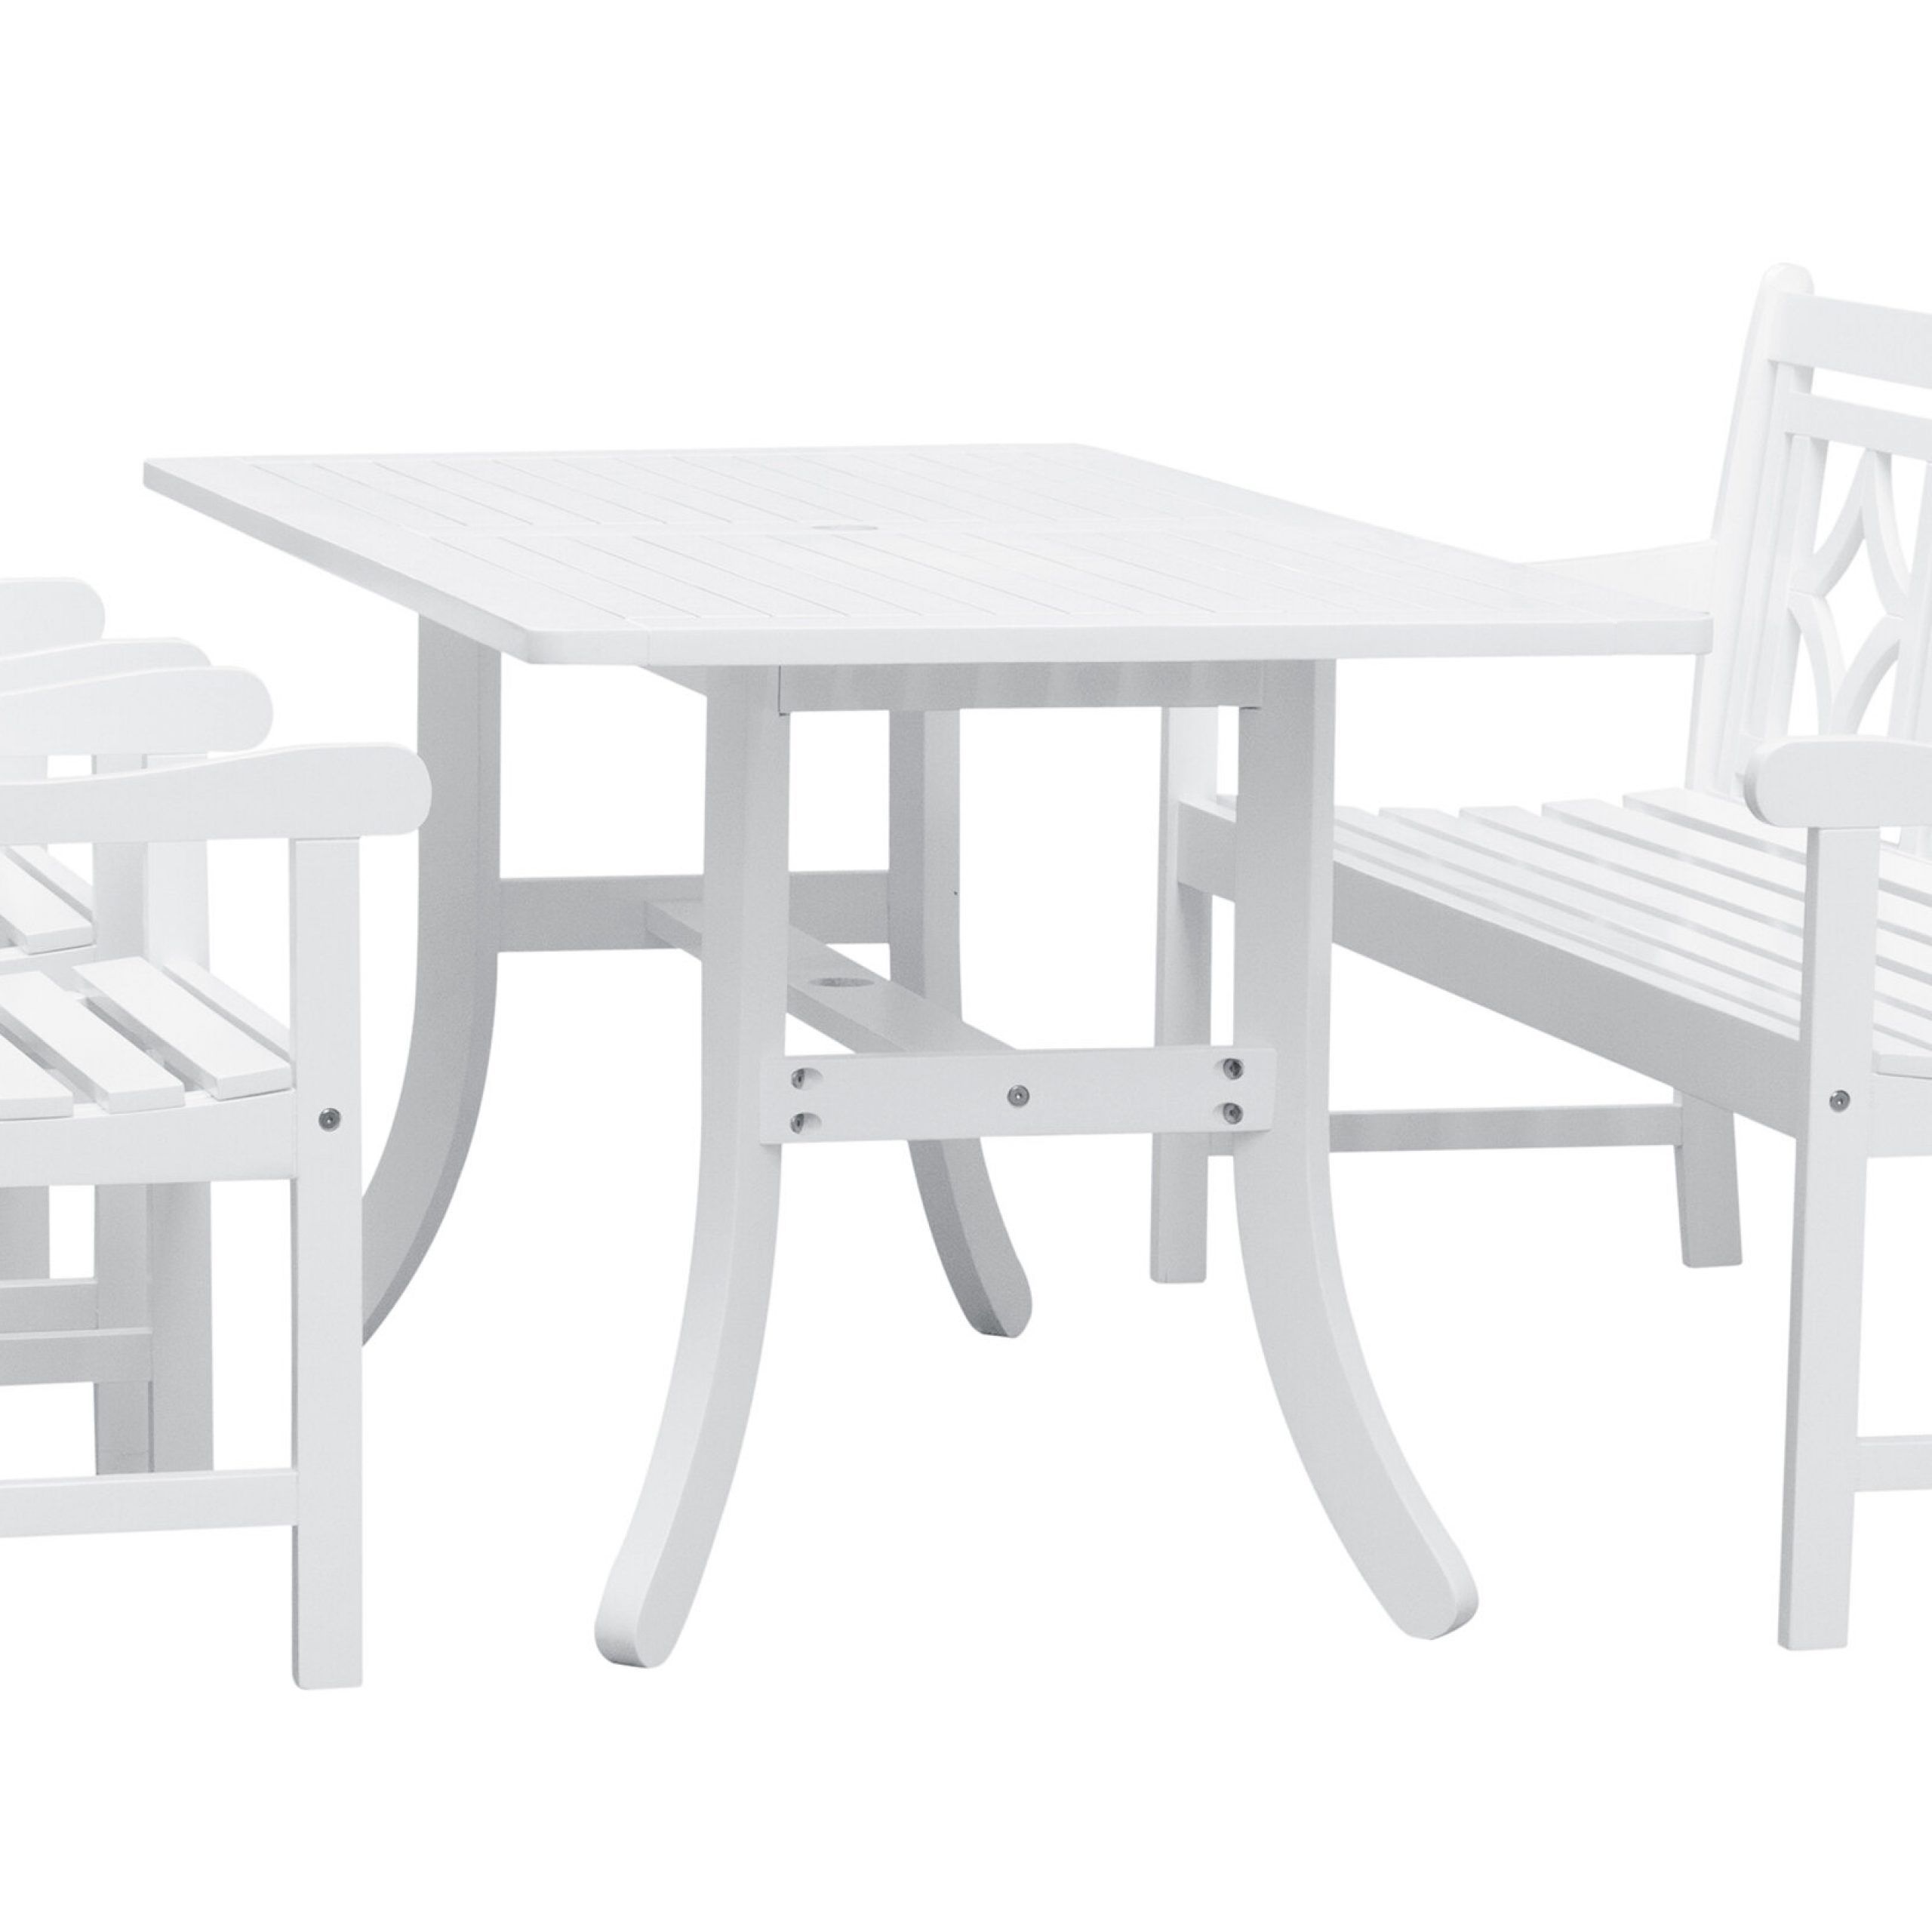 Amabel 4 Piece Patio Dining Set Intended For Amabel Patio Diamond Wooden Garden Benches (View 11 of 25)